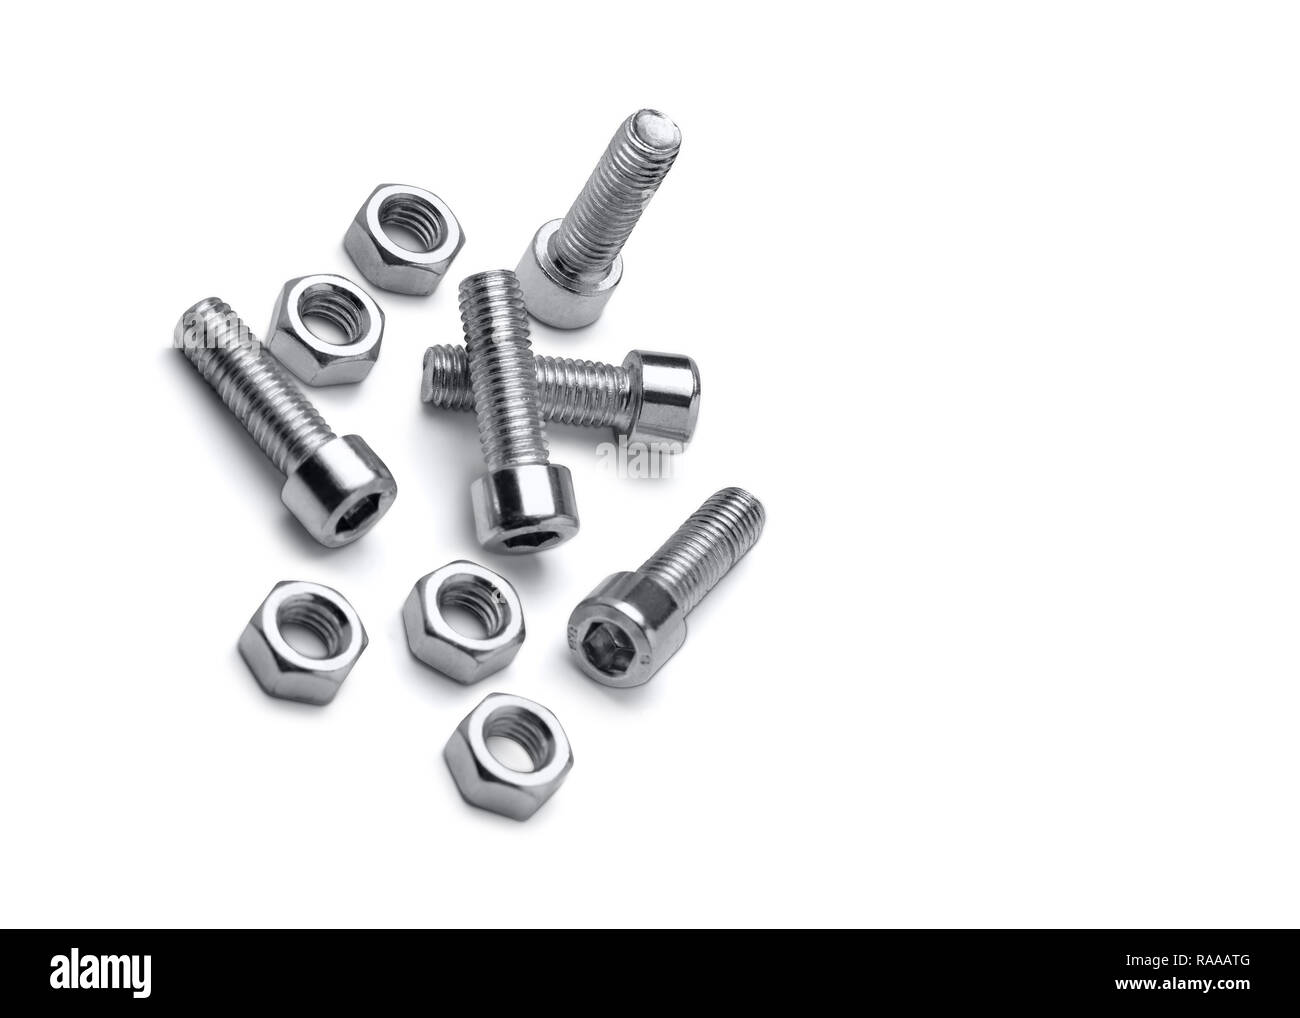 Nuts and bolts Stock Photo